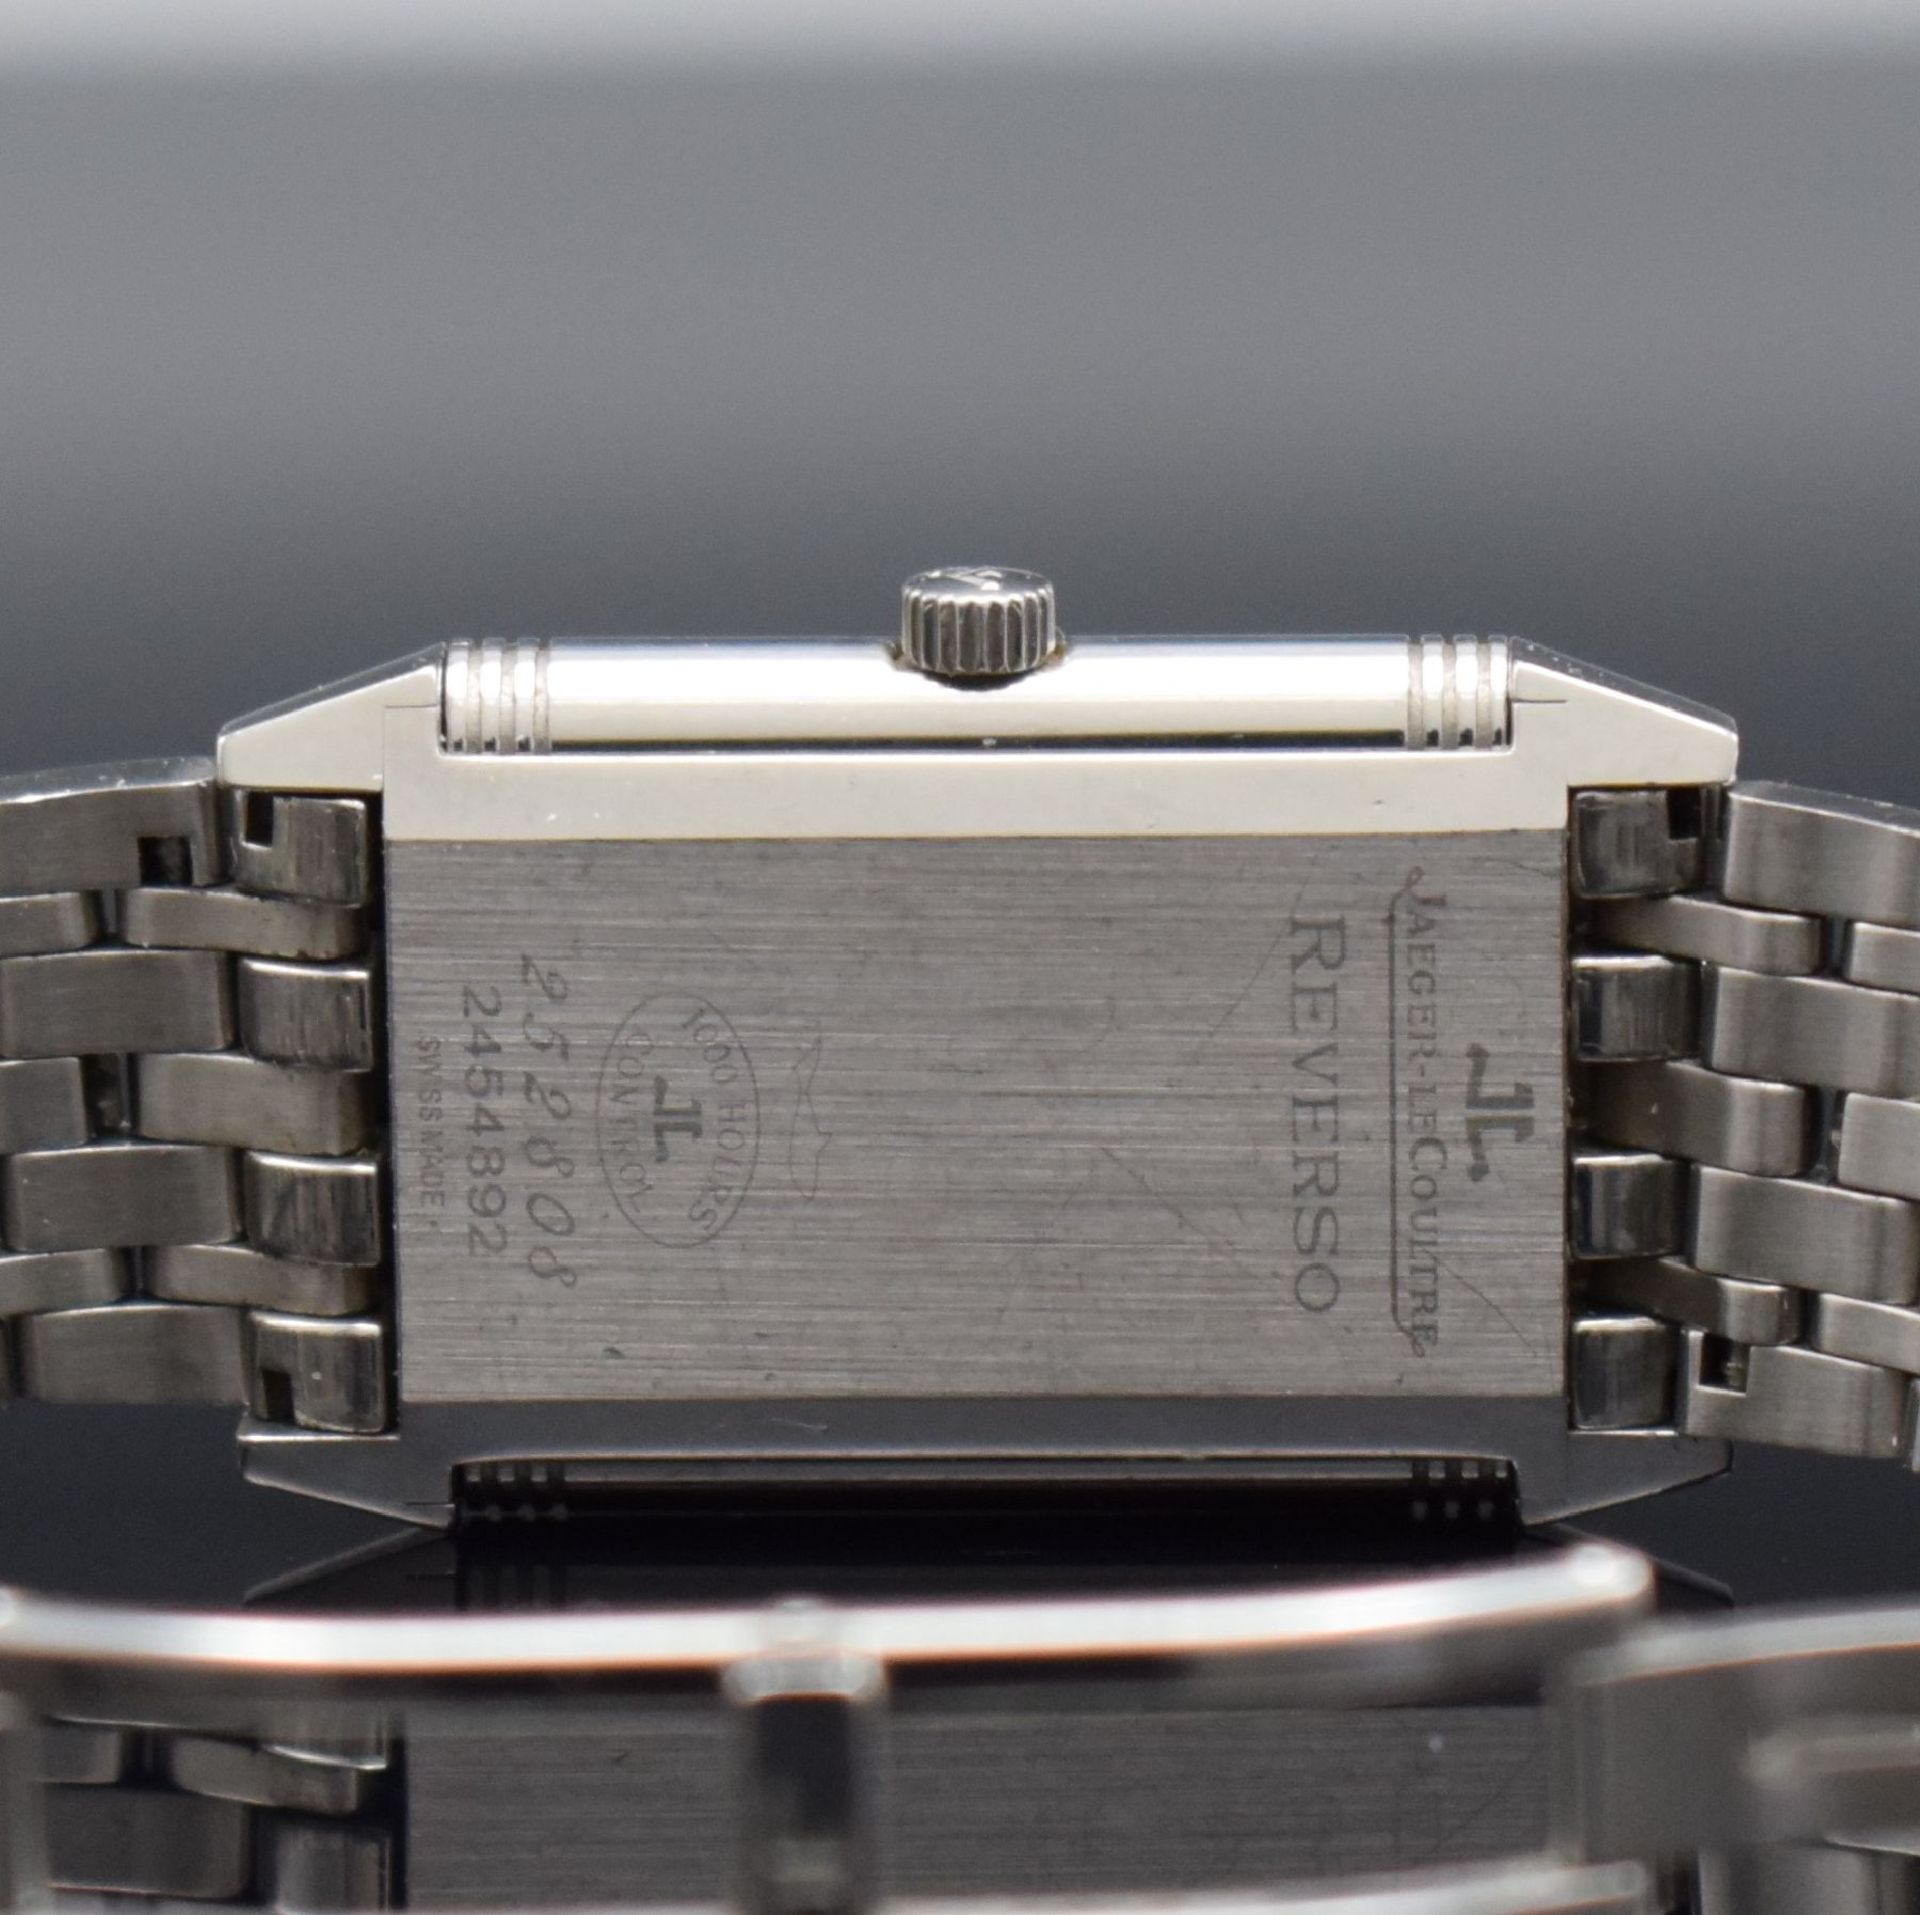 Jaeger-LeCoultre Reverso Classic Armbanduhr in Stahl, - Image 9 of 10